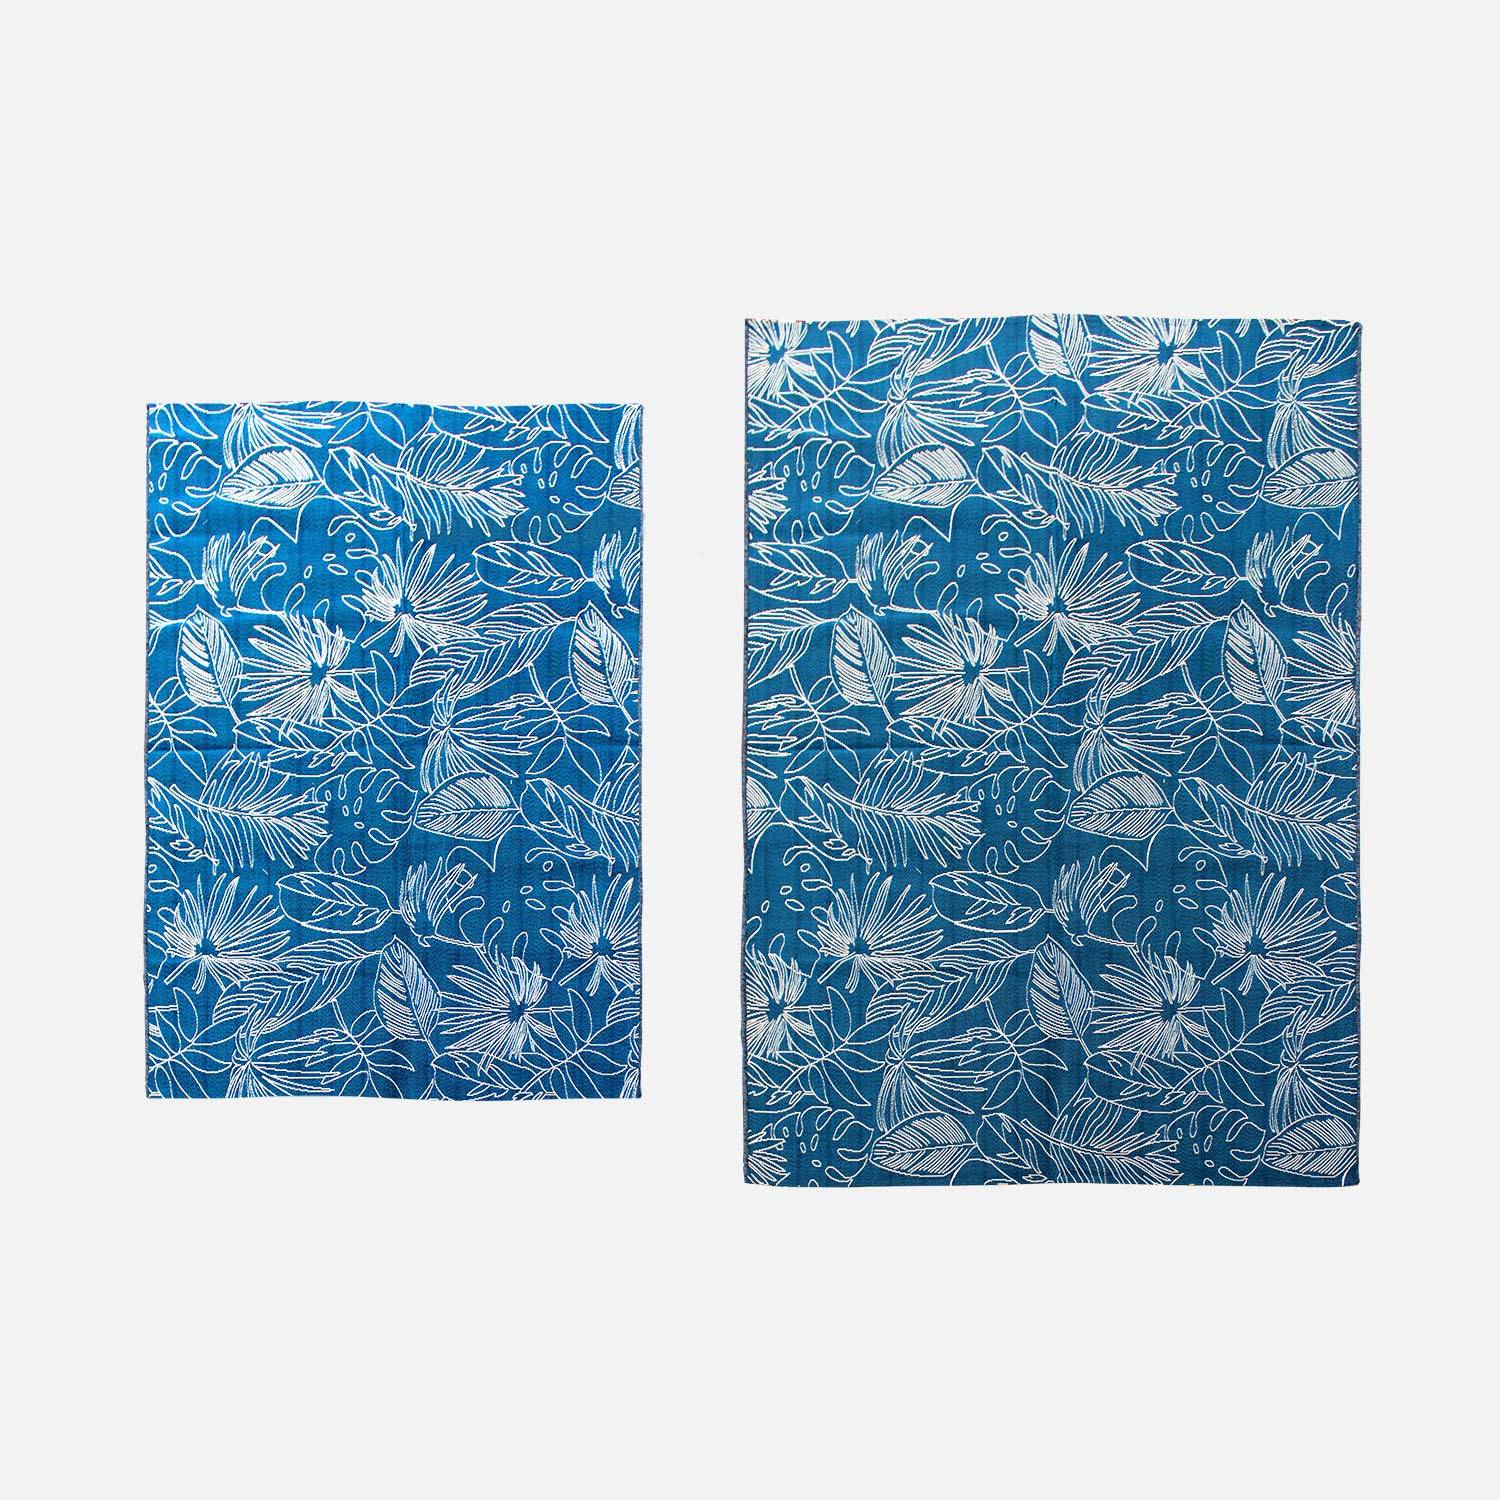 Outdoor rug - 200x290cm - rectangular, indoor/outdoor use - Exotic - Blue and white,sweeek,Photo3